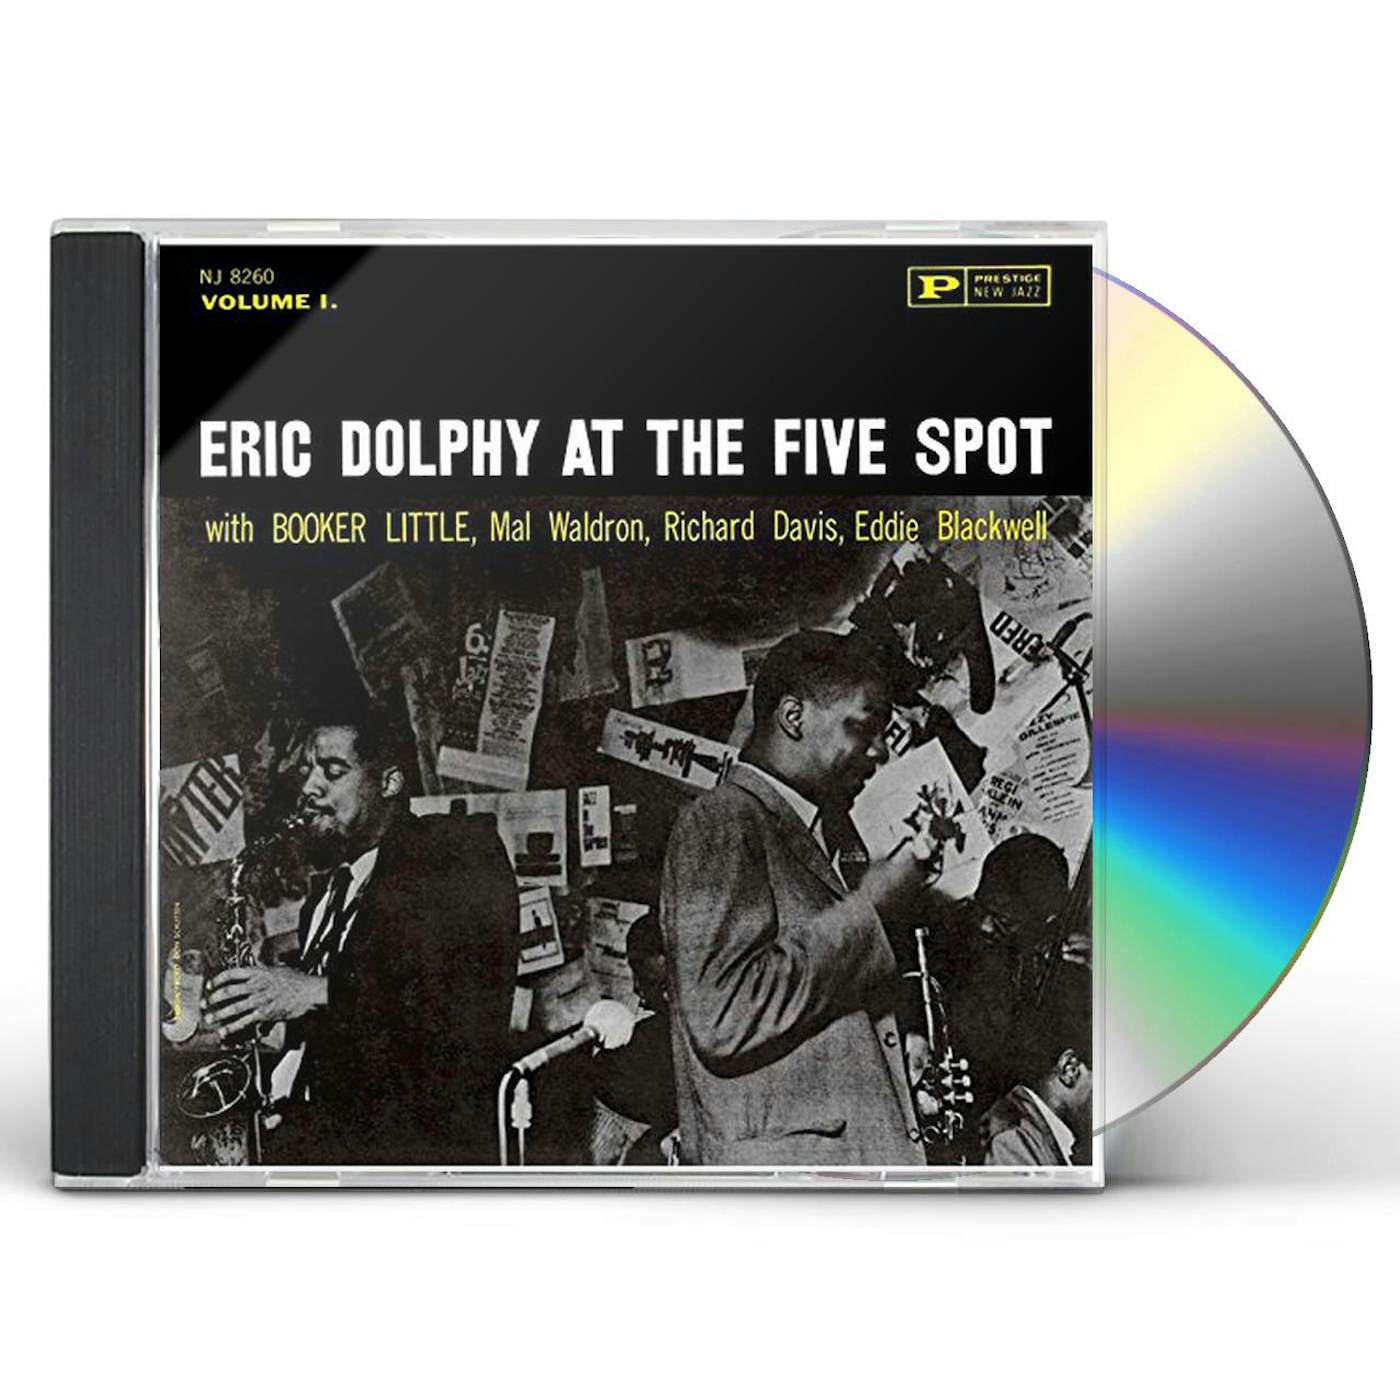 Eric Dolphy AT THE FIVE SPOT VOL 1 CD